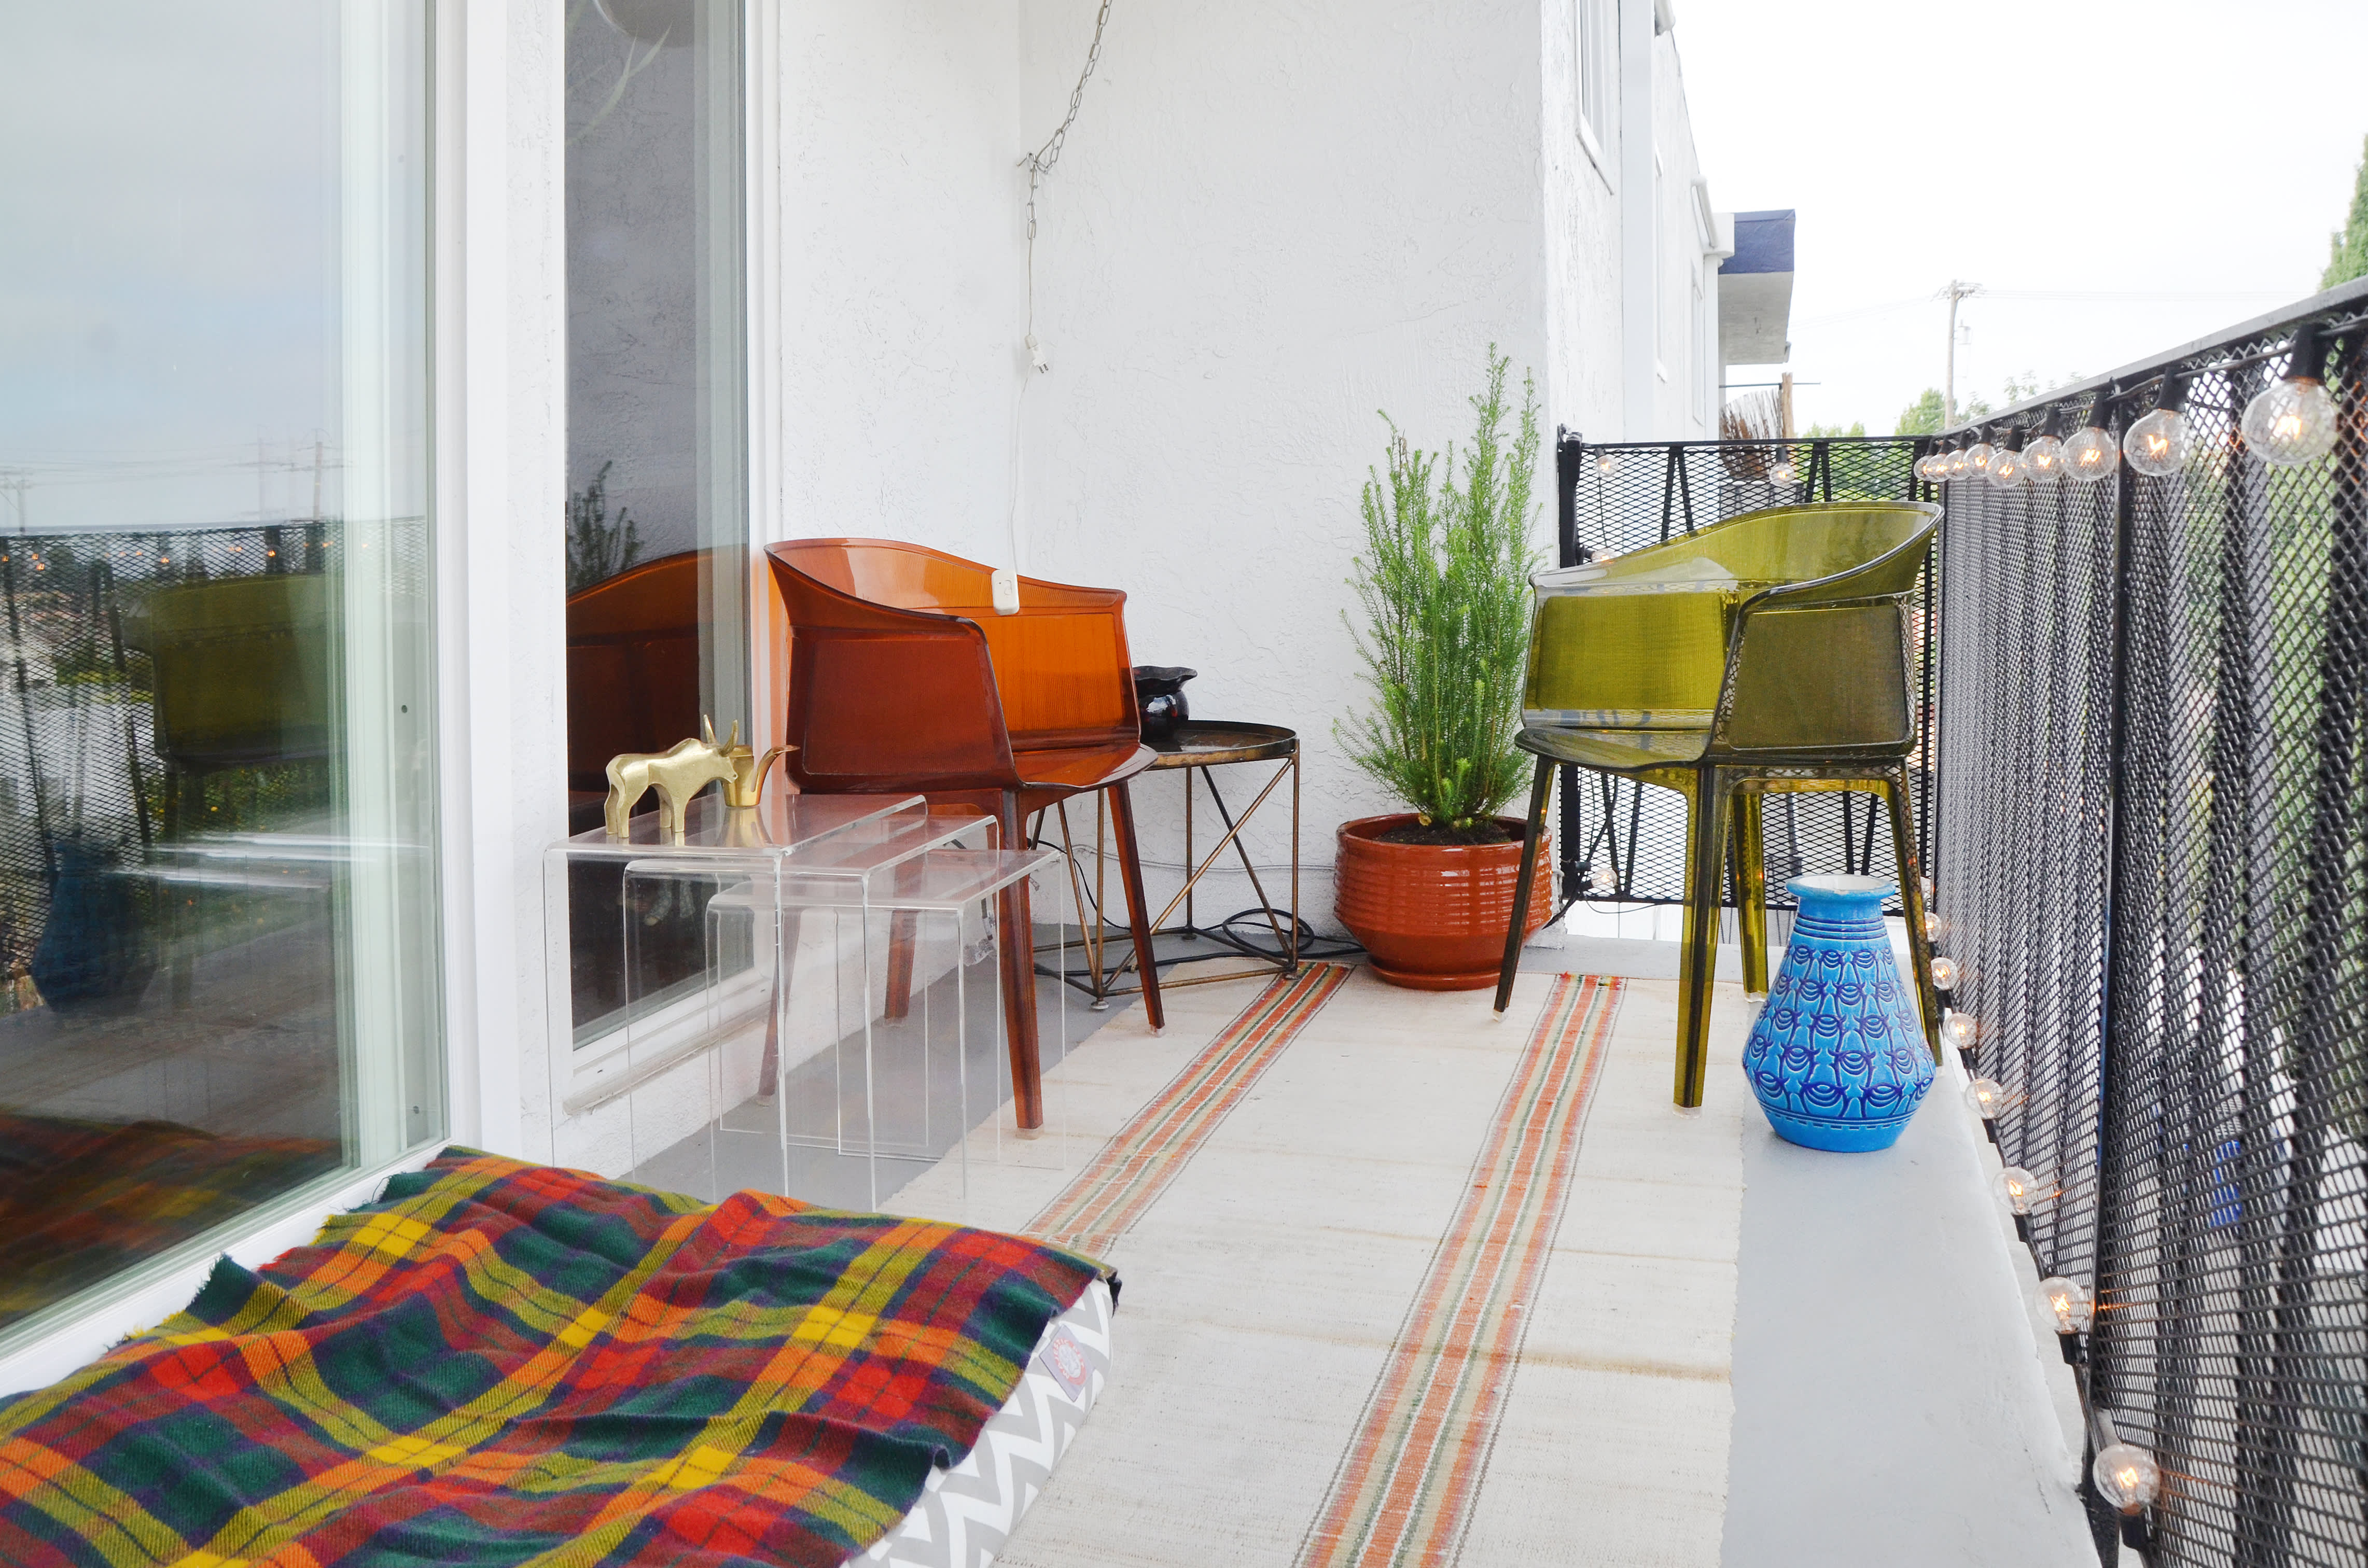 25 Best Balcony Ideas to Decorate a Small Balcony | Apartment Therapy